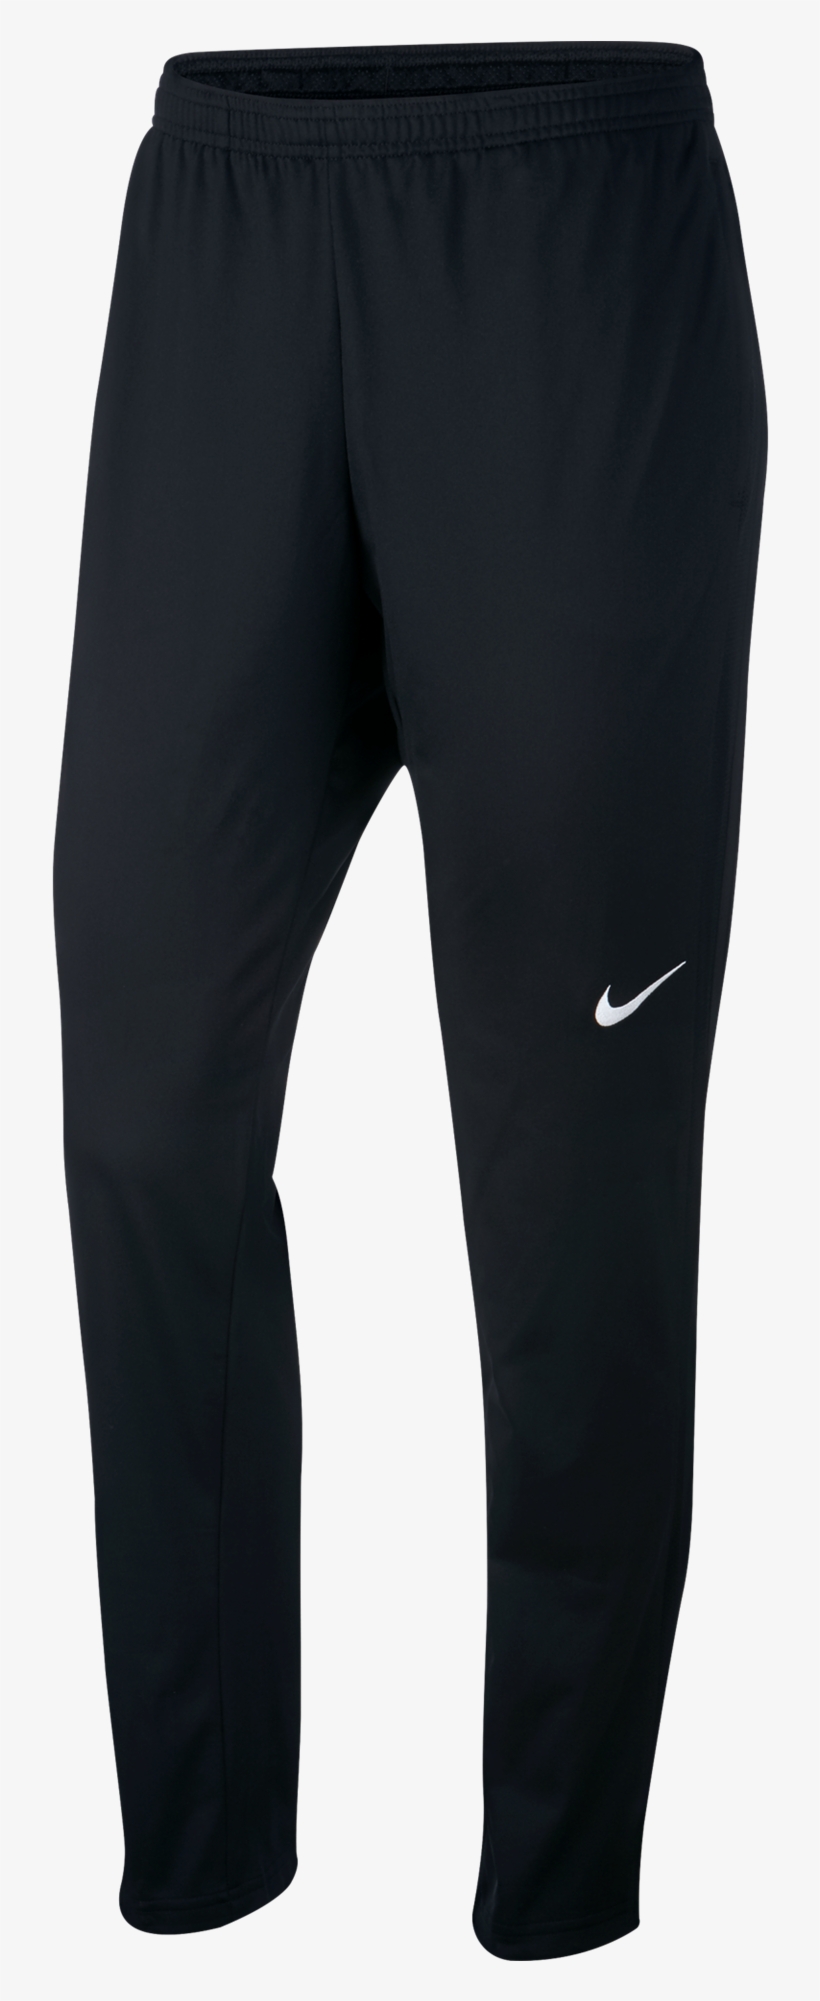 Picture Of Nike Women's Academy 18 Tech - Nike Bliss Victory Pants ...